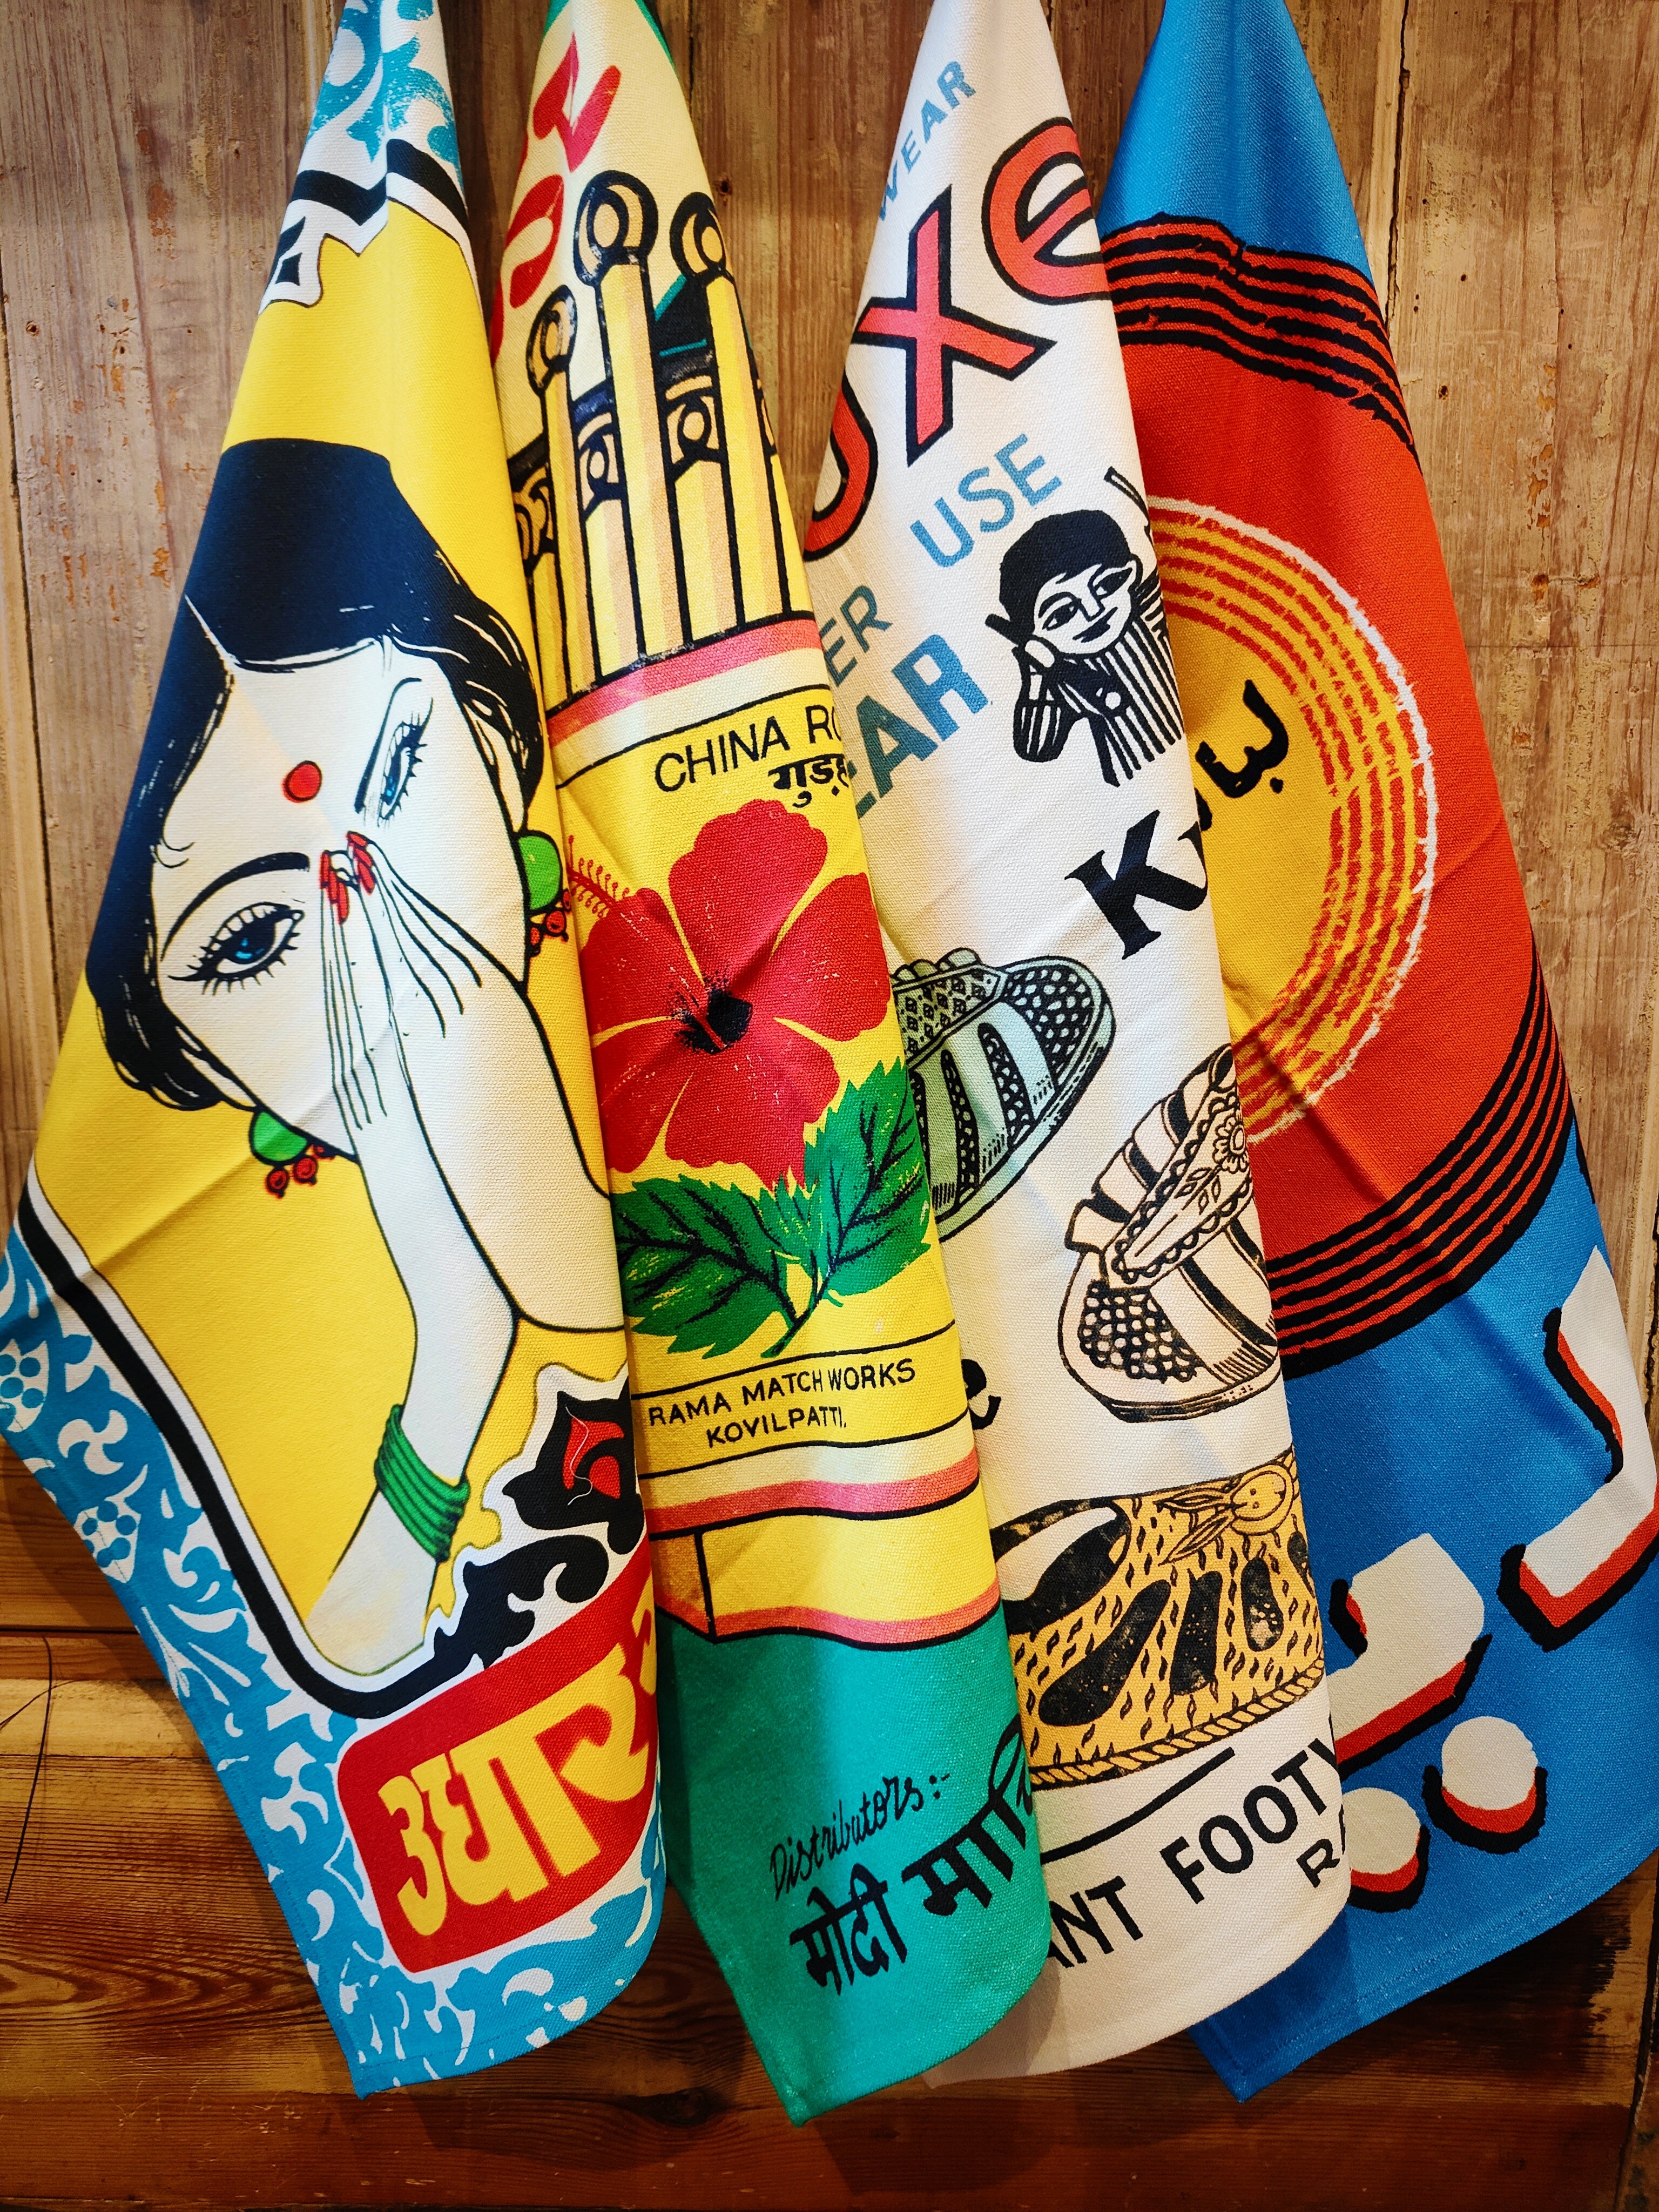 Our absolute favourite vintage packaging, advertising and bollywood combined in fabulous bright cotton tea towels to give your kitchen a bit of vintage India style!

100%  Indian cotton

60cm x 50cm

